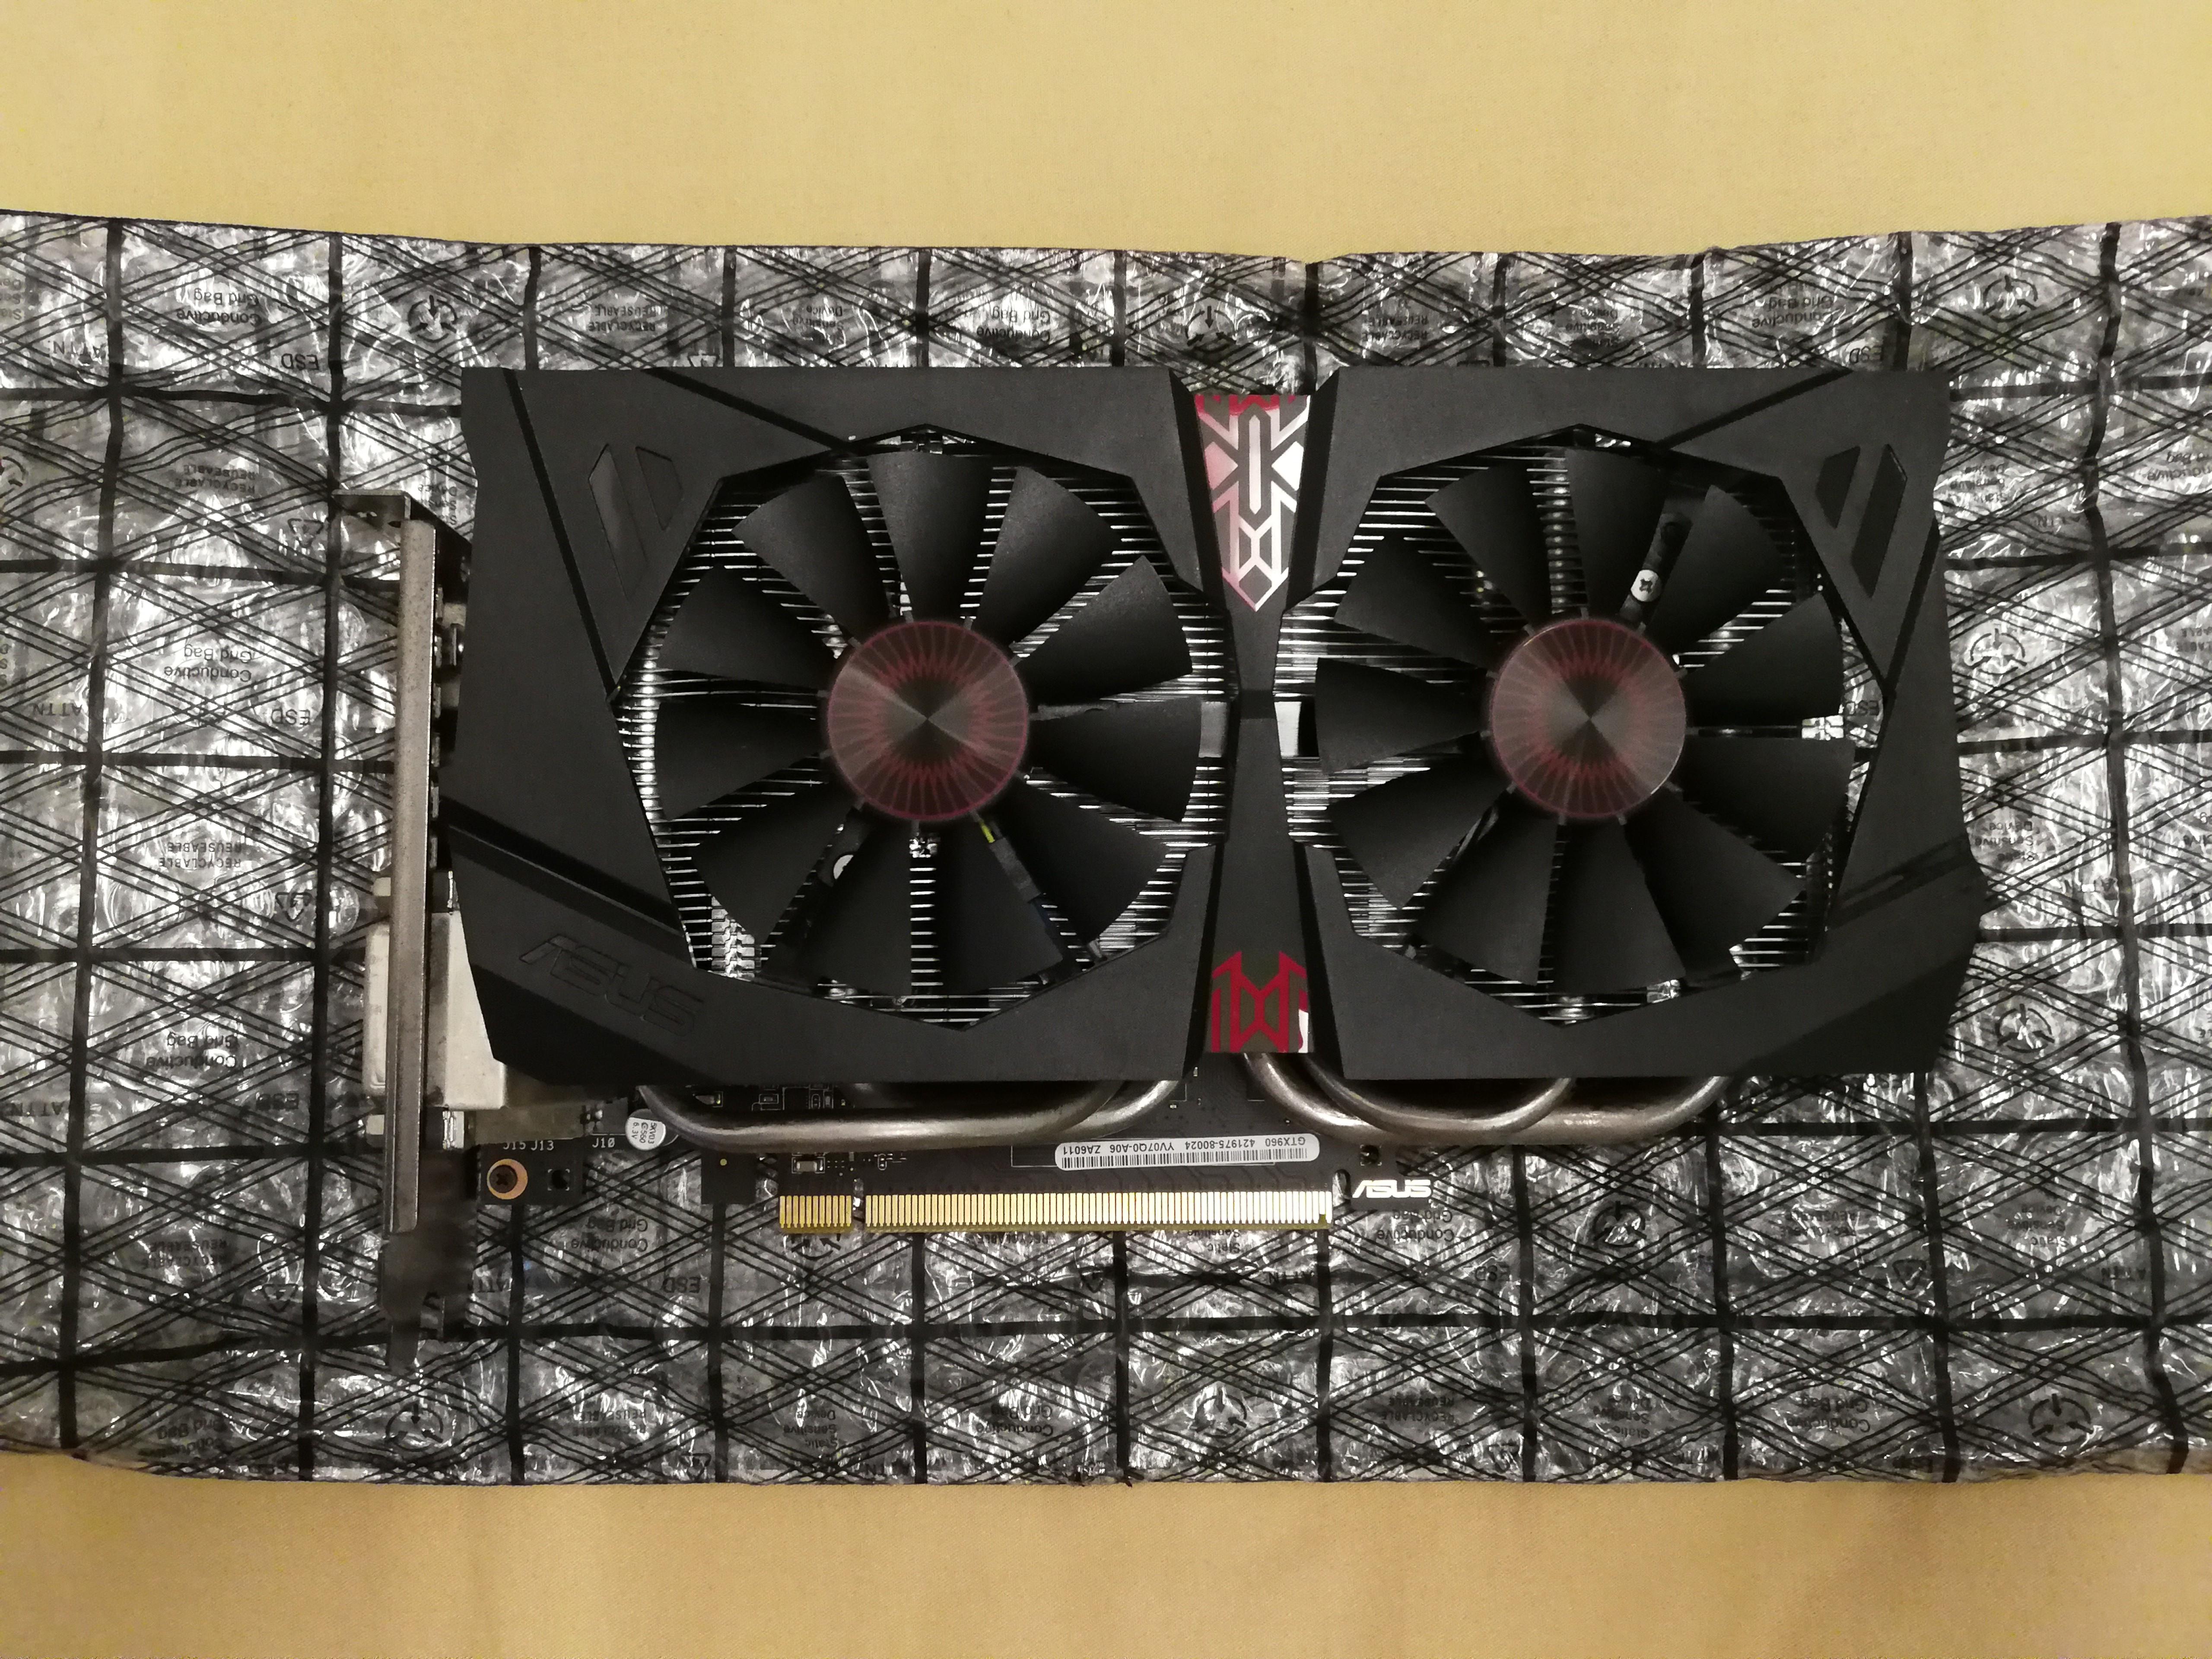 Asus Strix Geforce Gtx 960 4gb Electronics Computer Parts Accessories On Carousell